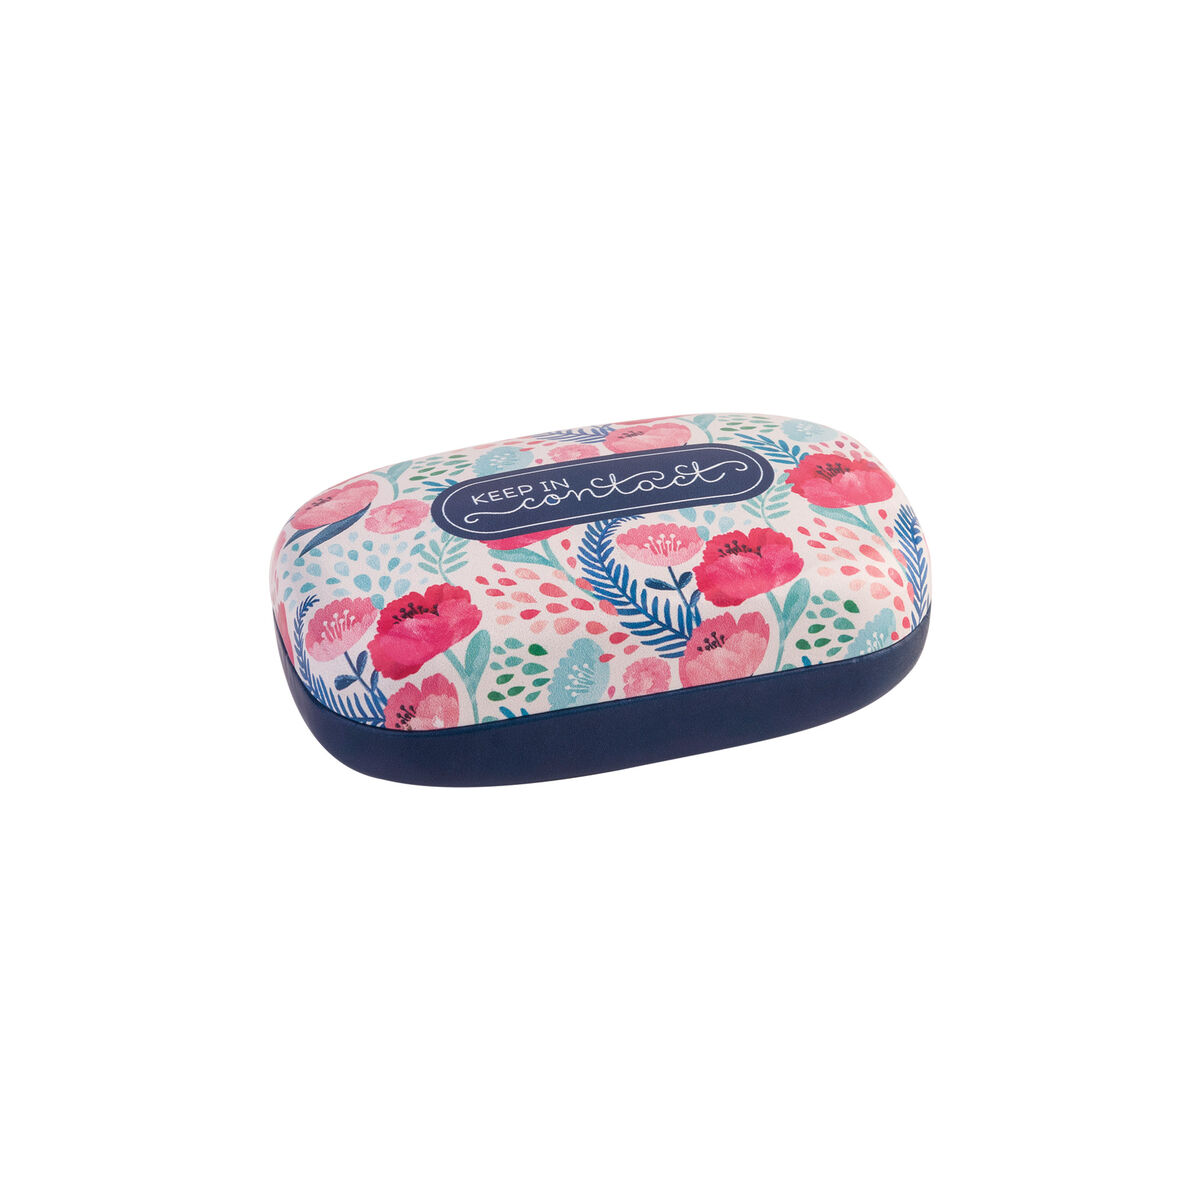 Contact Lens Case With Mirrors - Keep In Contact, , zoo